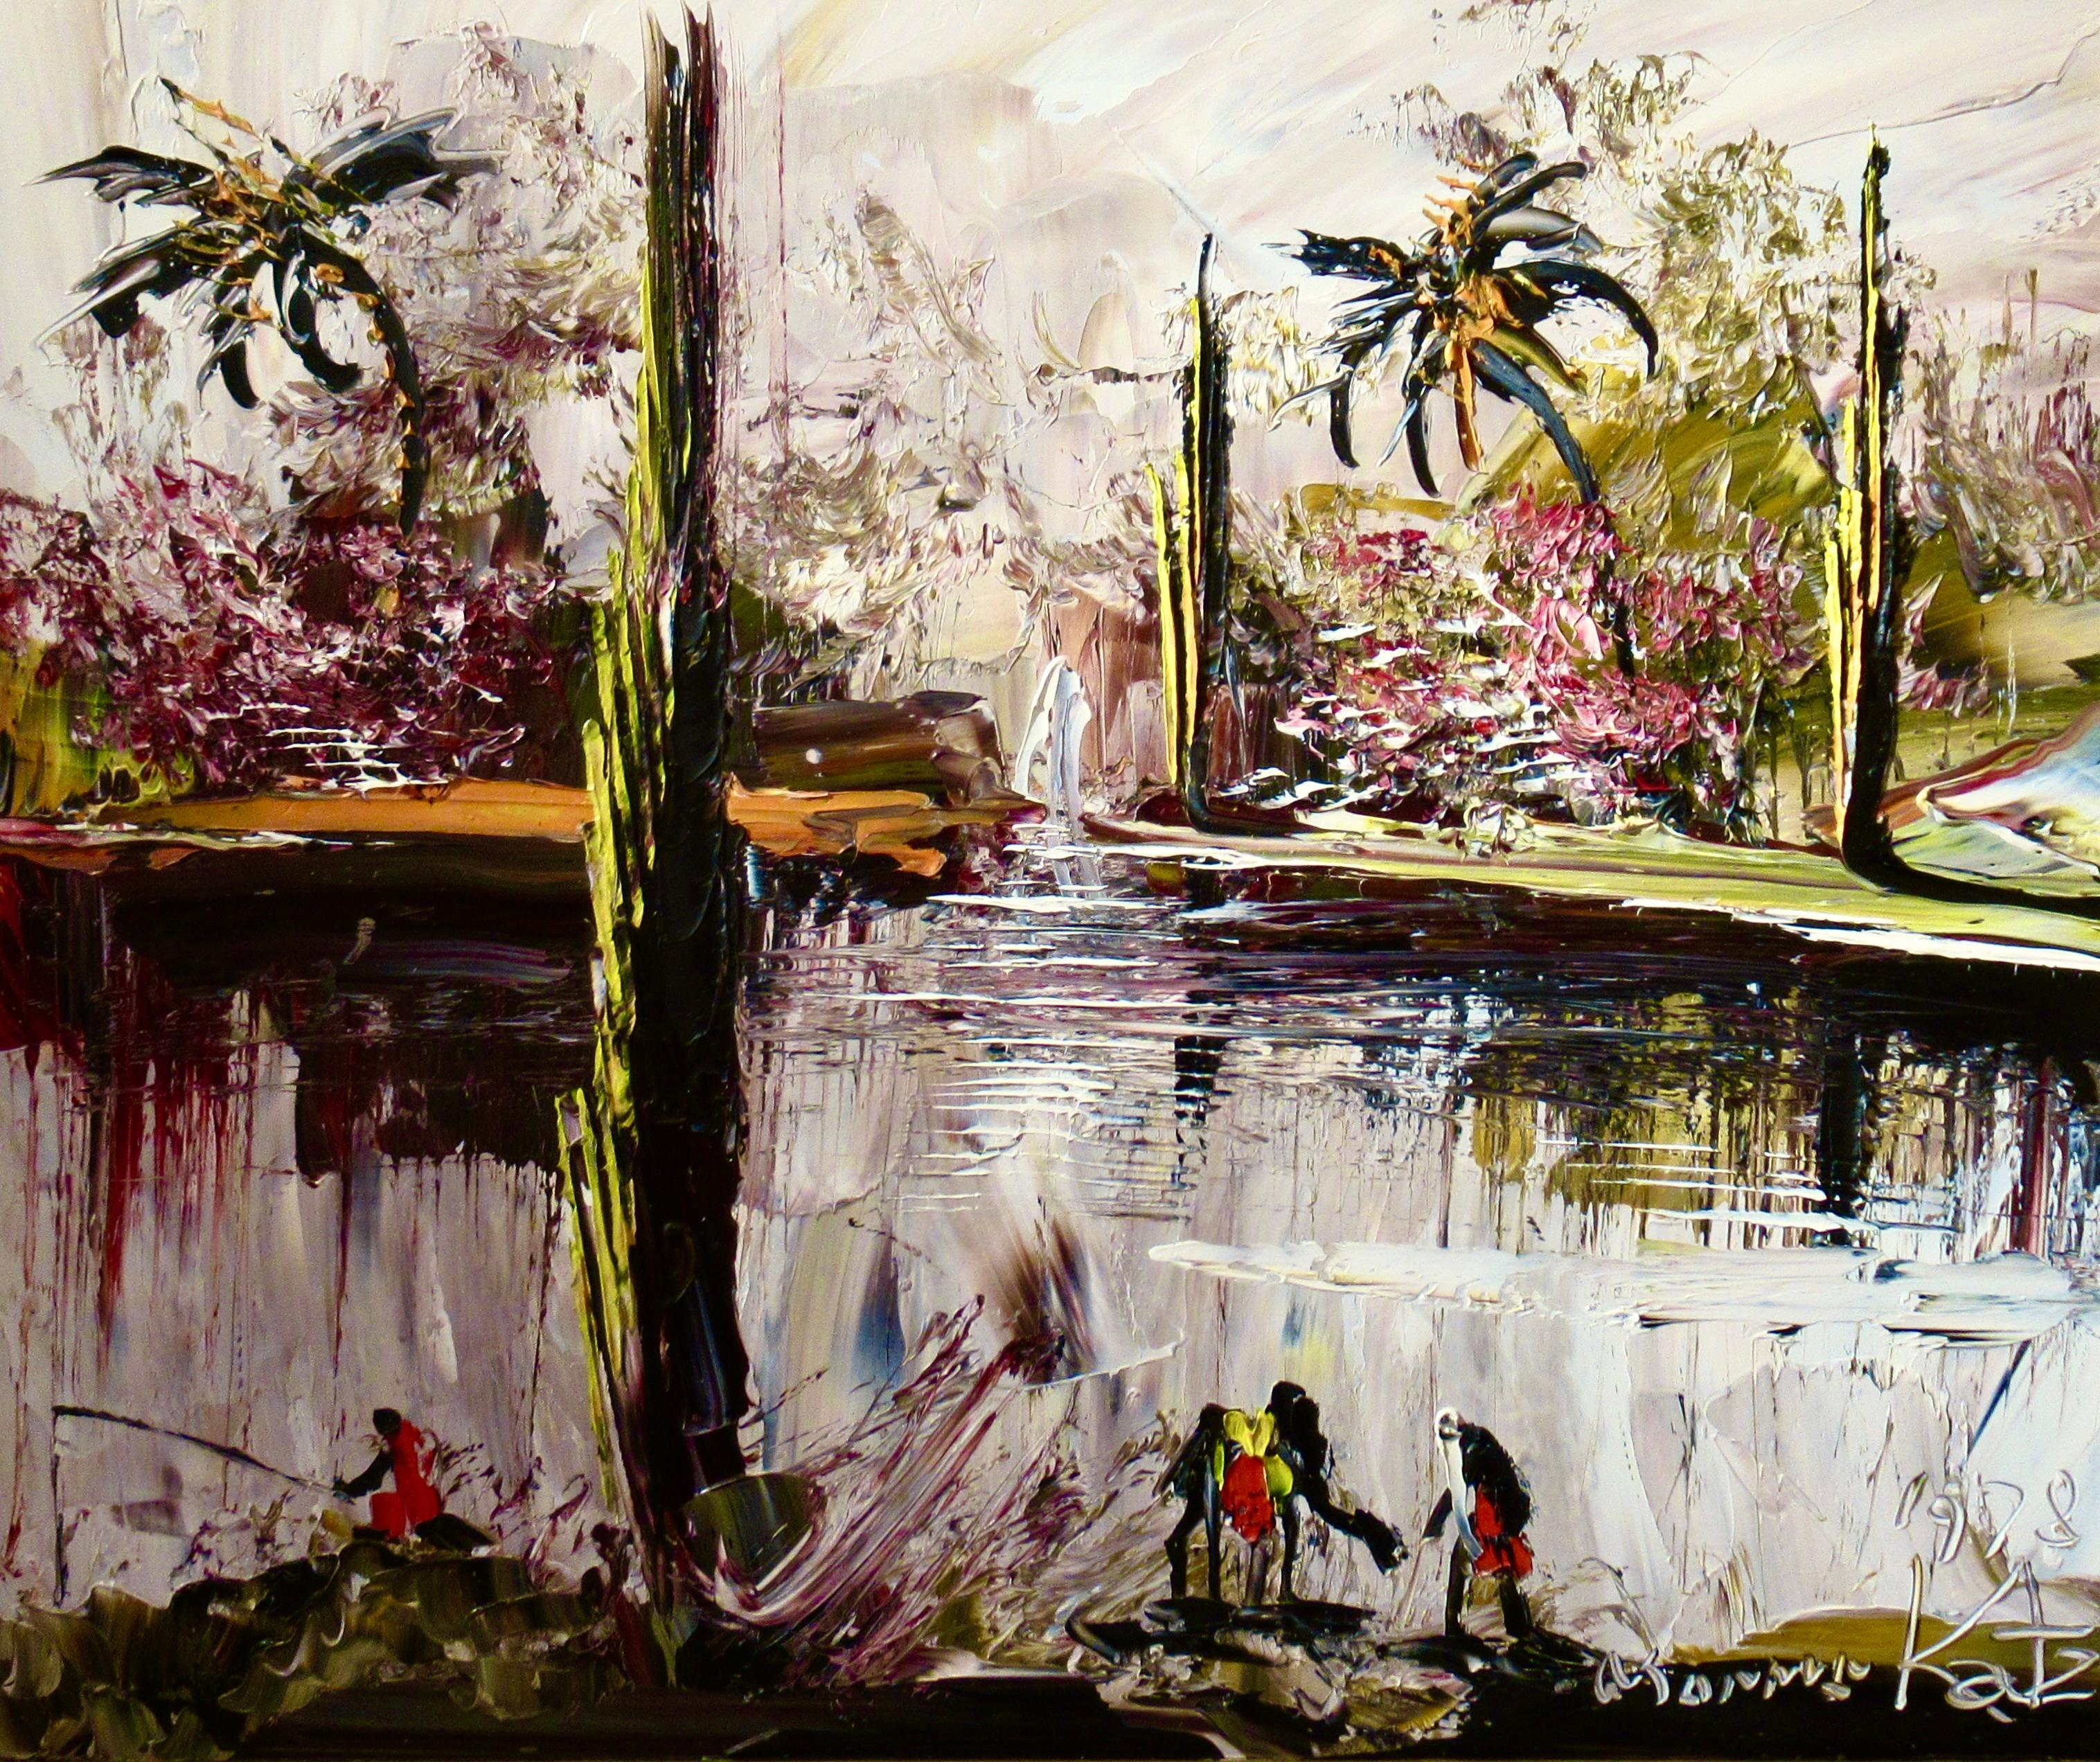 Landscape with people fishing - Painting by Morris Katz